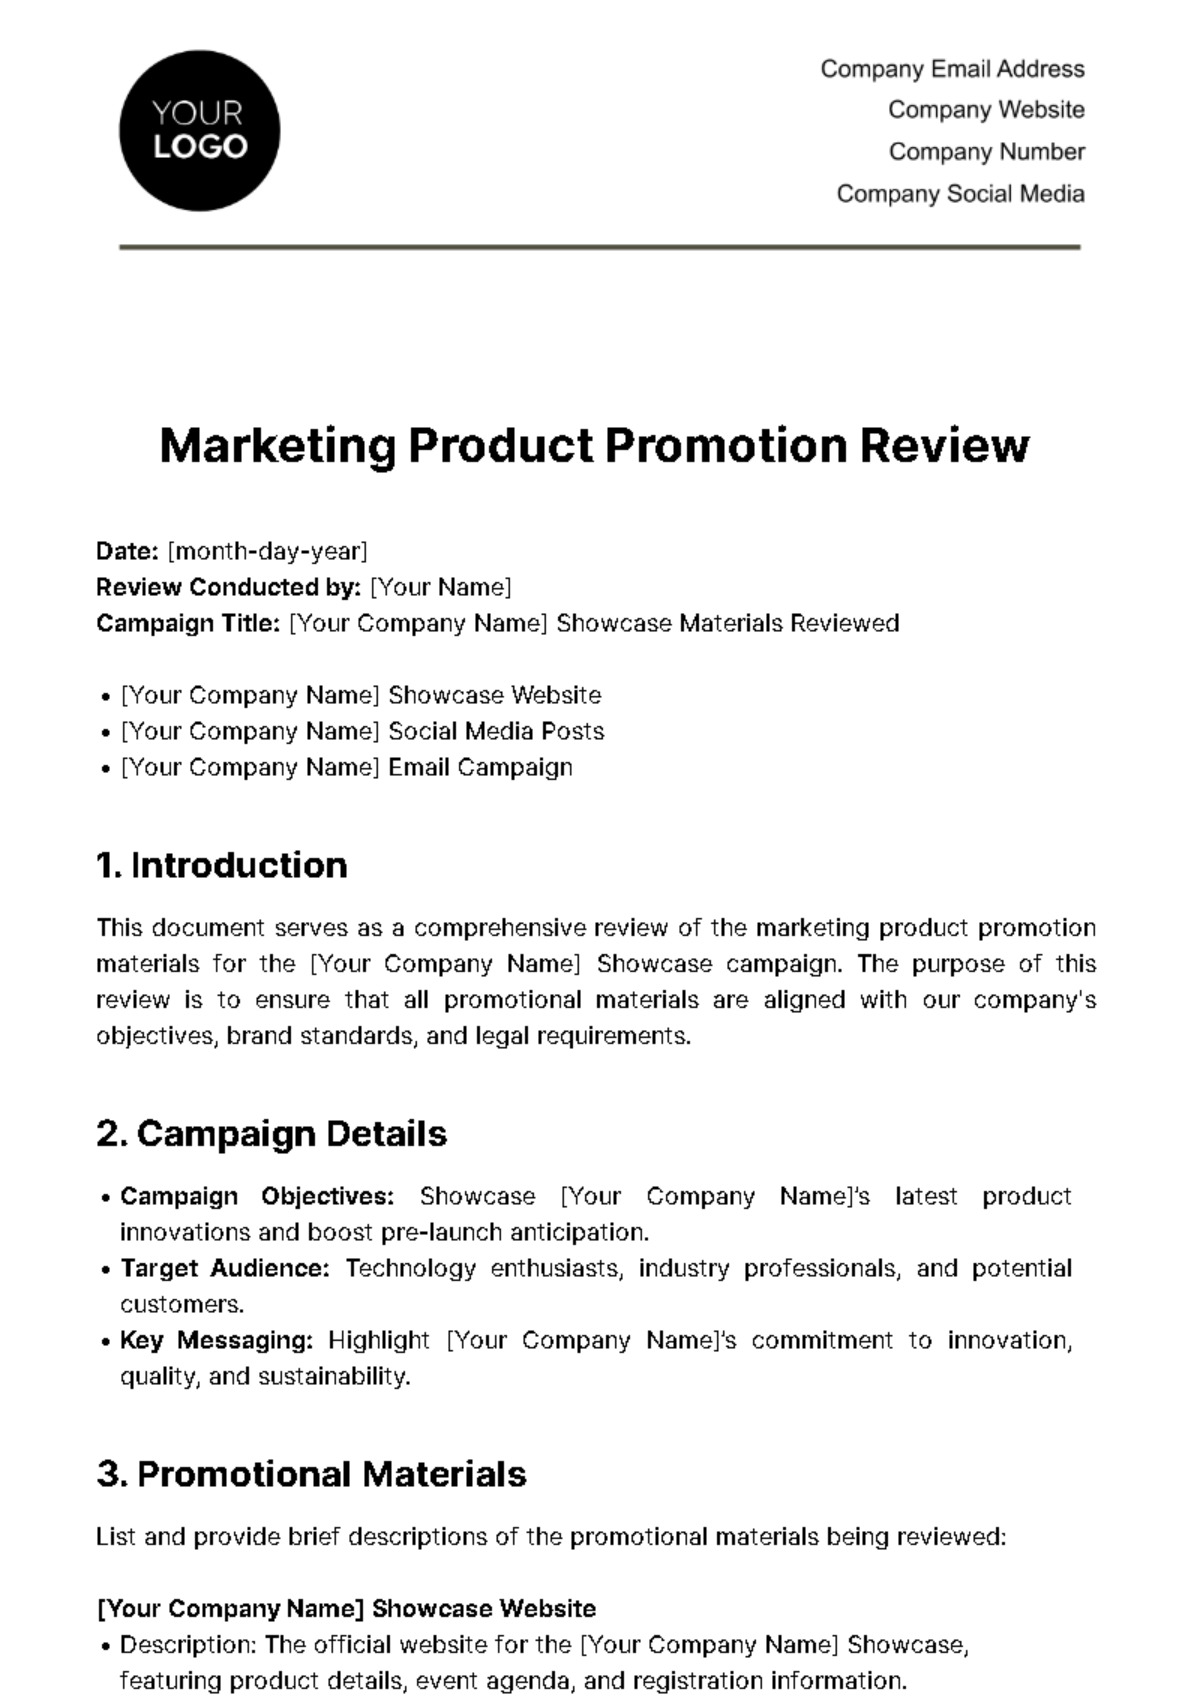 Free Marketing Product Promotion Review Template